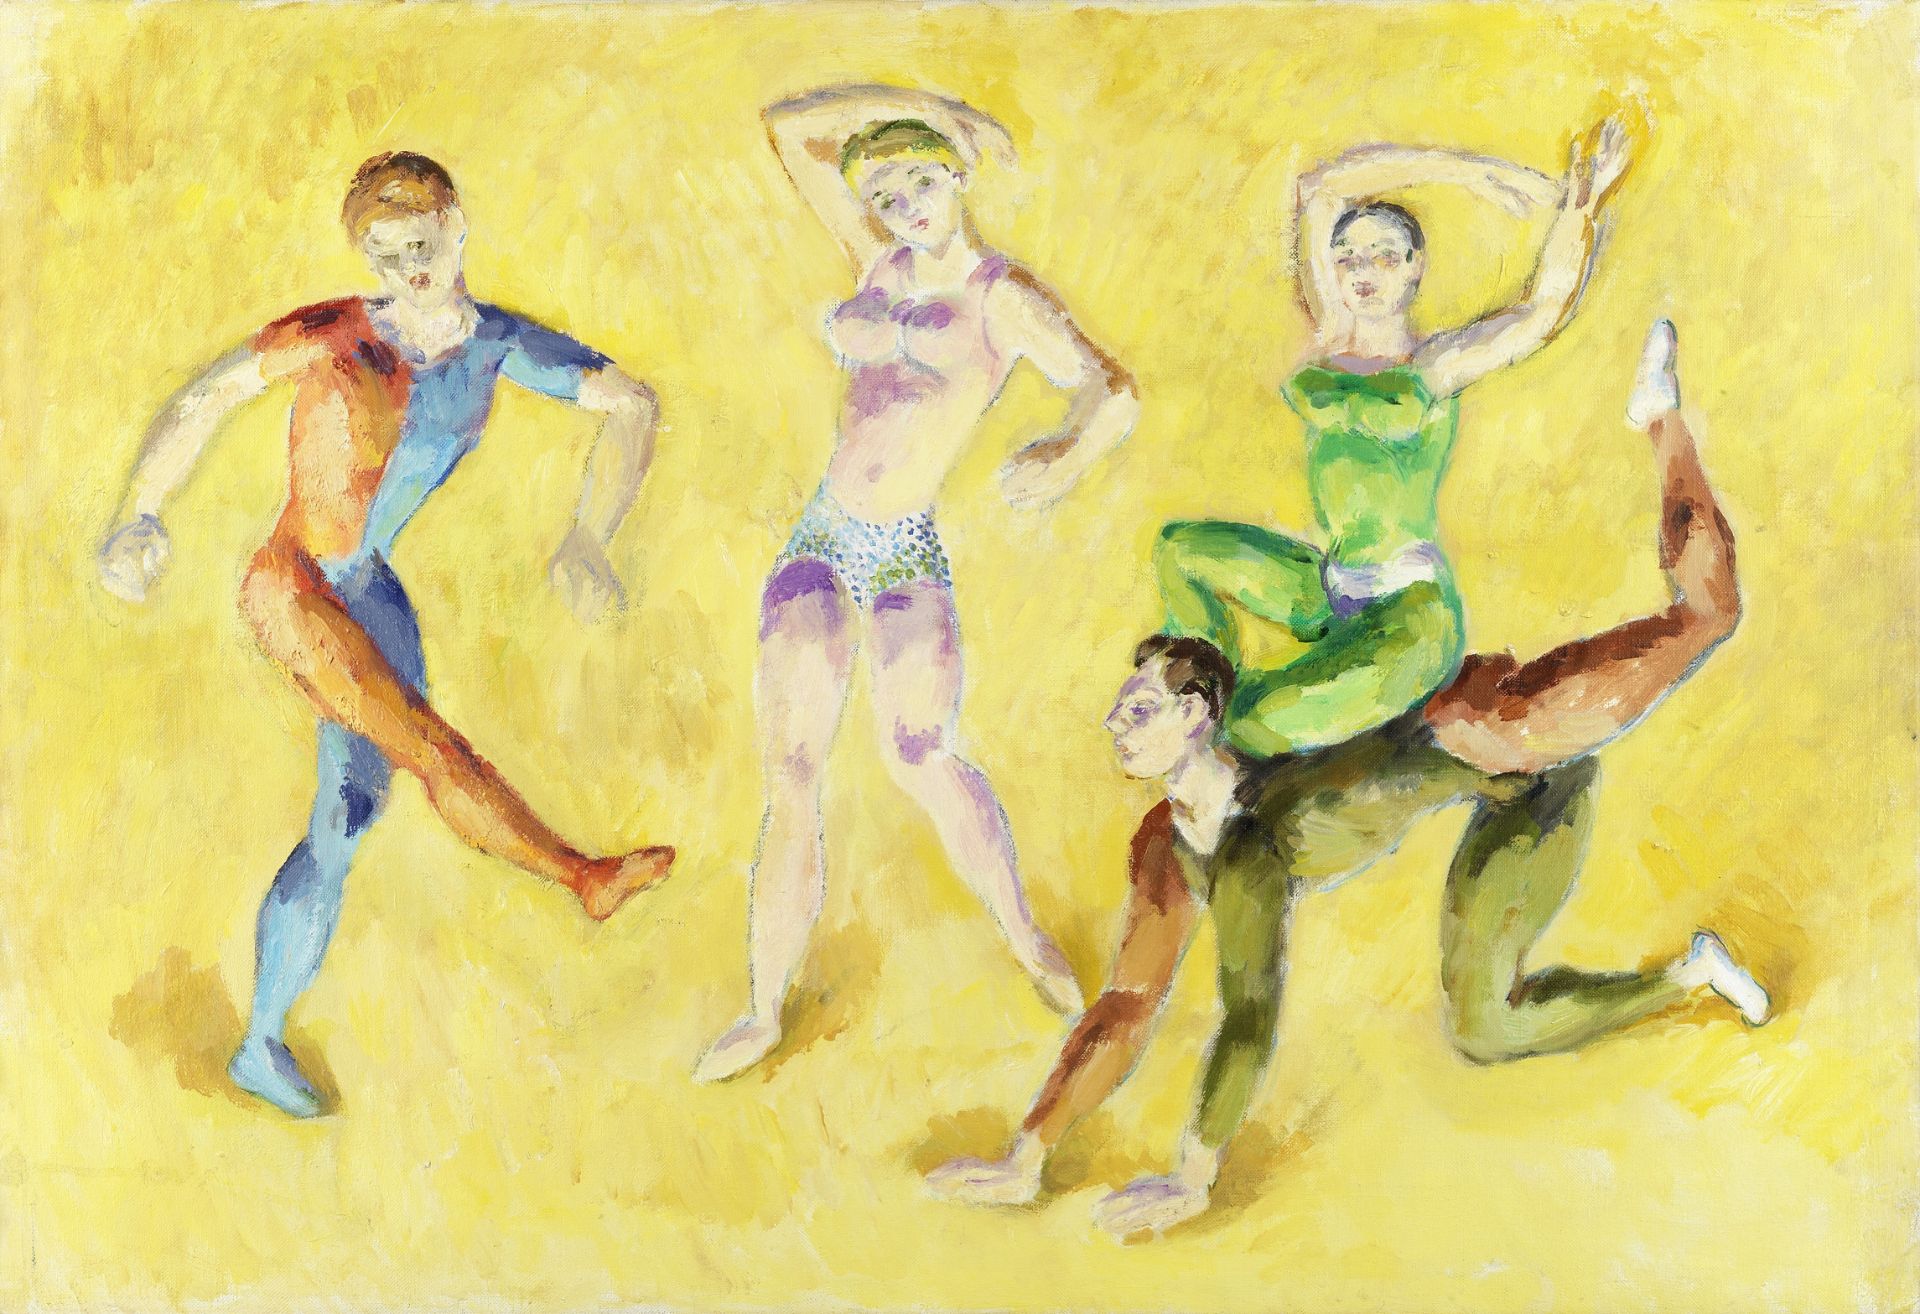 Duncan Grant (British, 1885-1978) Taylor Ballet (Painted in 1964)